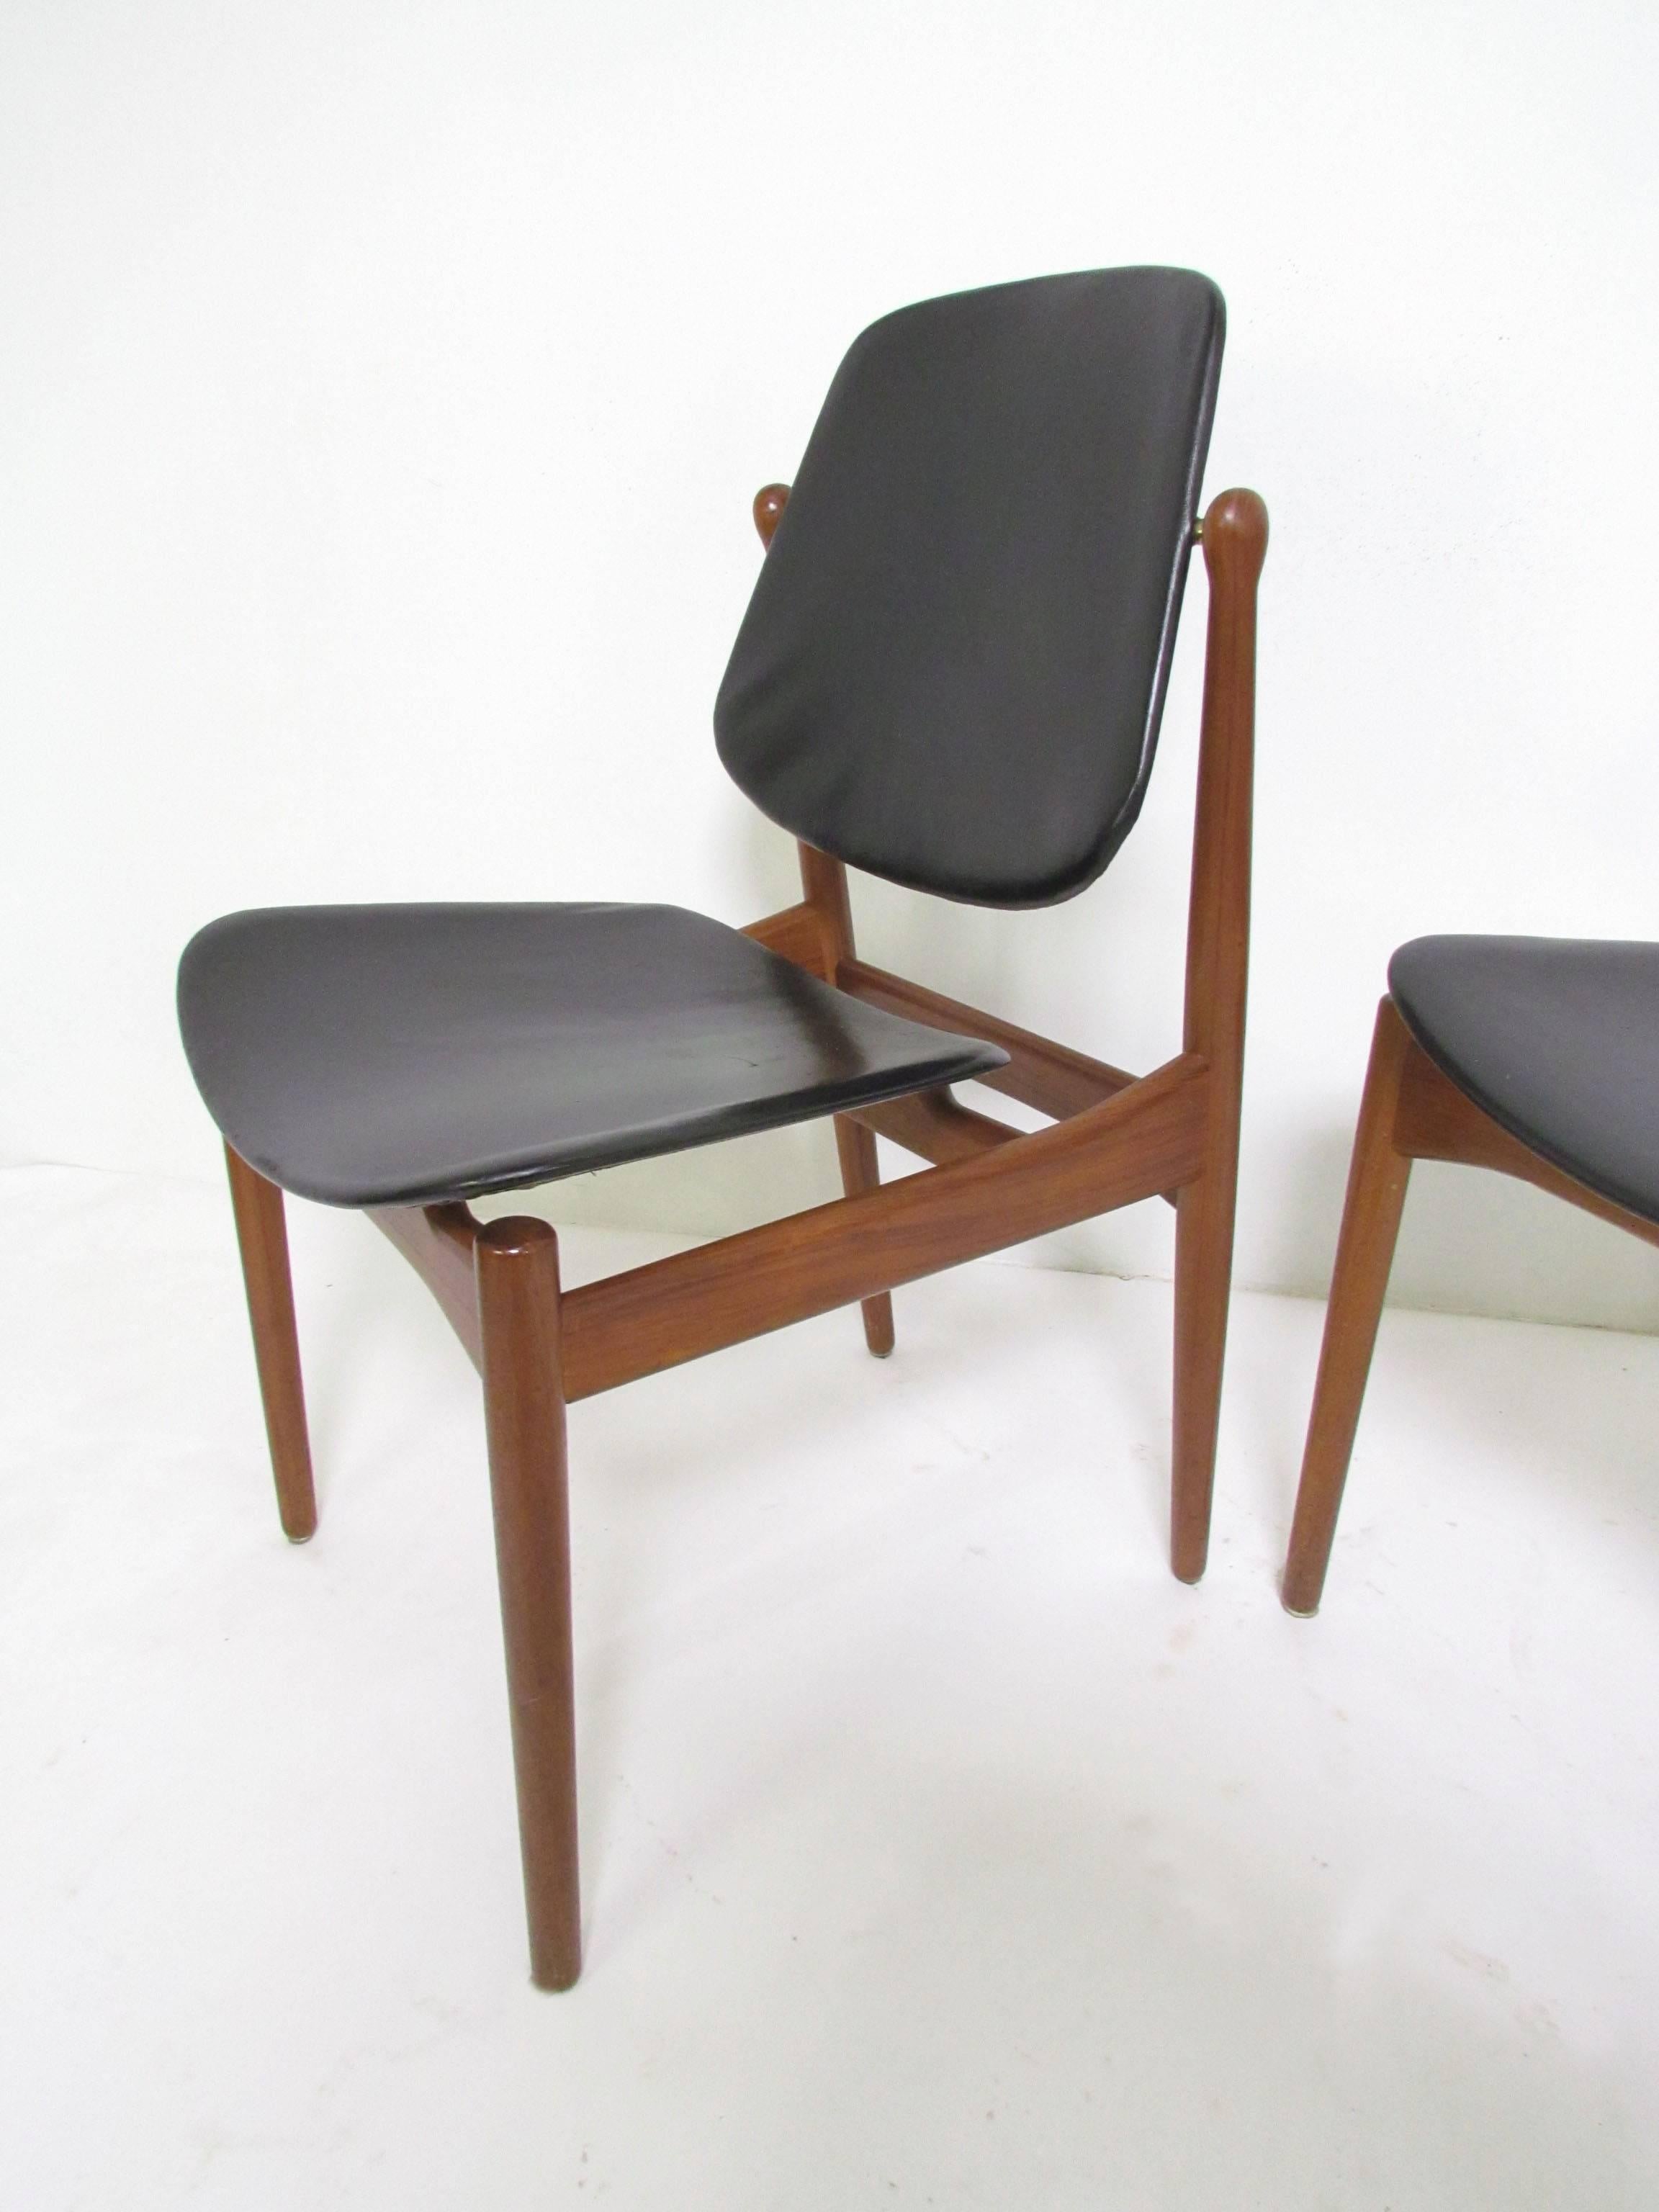 Set of six teak dining chairs with original leather upholstery designed by Arne Vodder for France & Daverkosen, Denmark, circa 1950s. One armchair and five sides, with pivoting backs and brass hardware.

Armchair measures 25" wide,